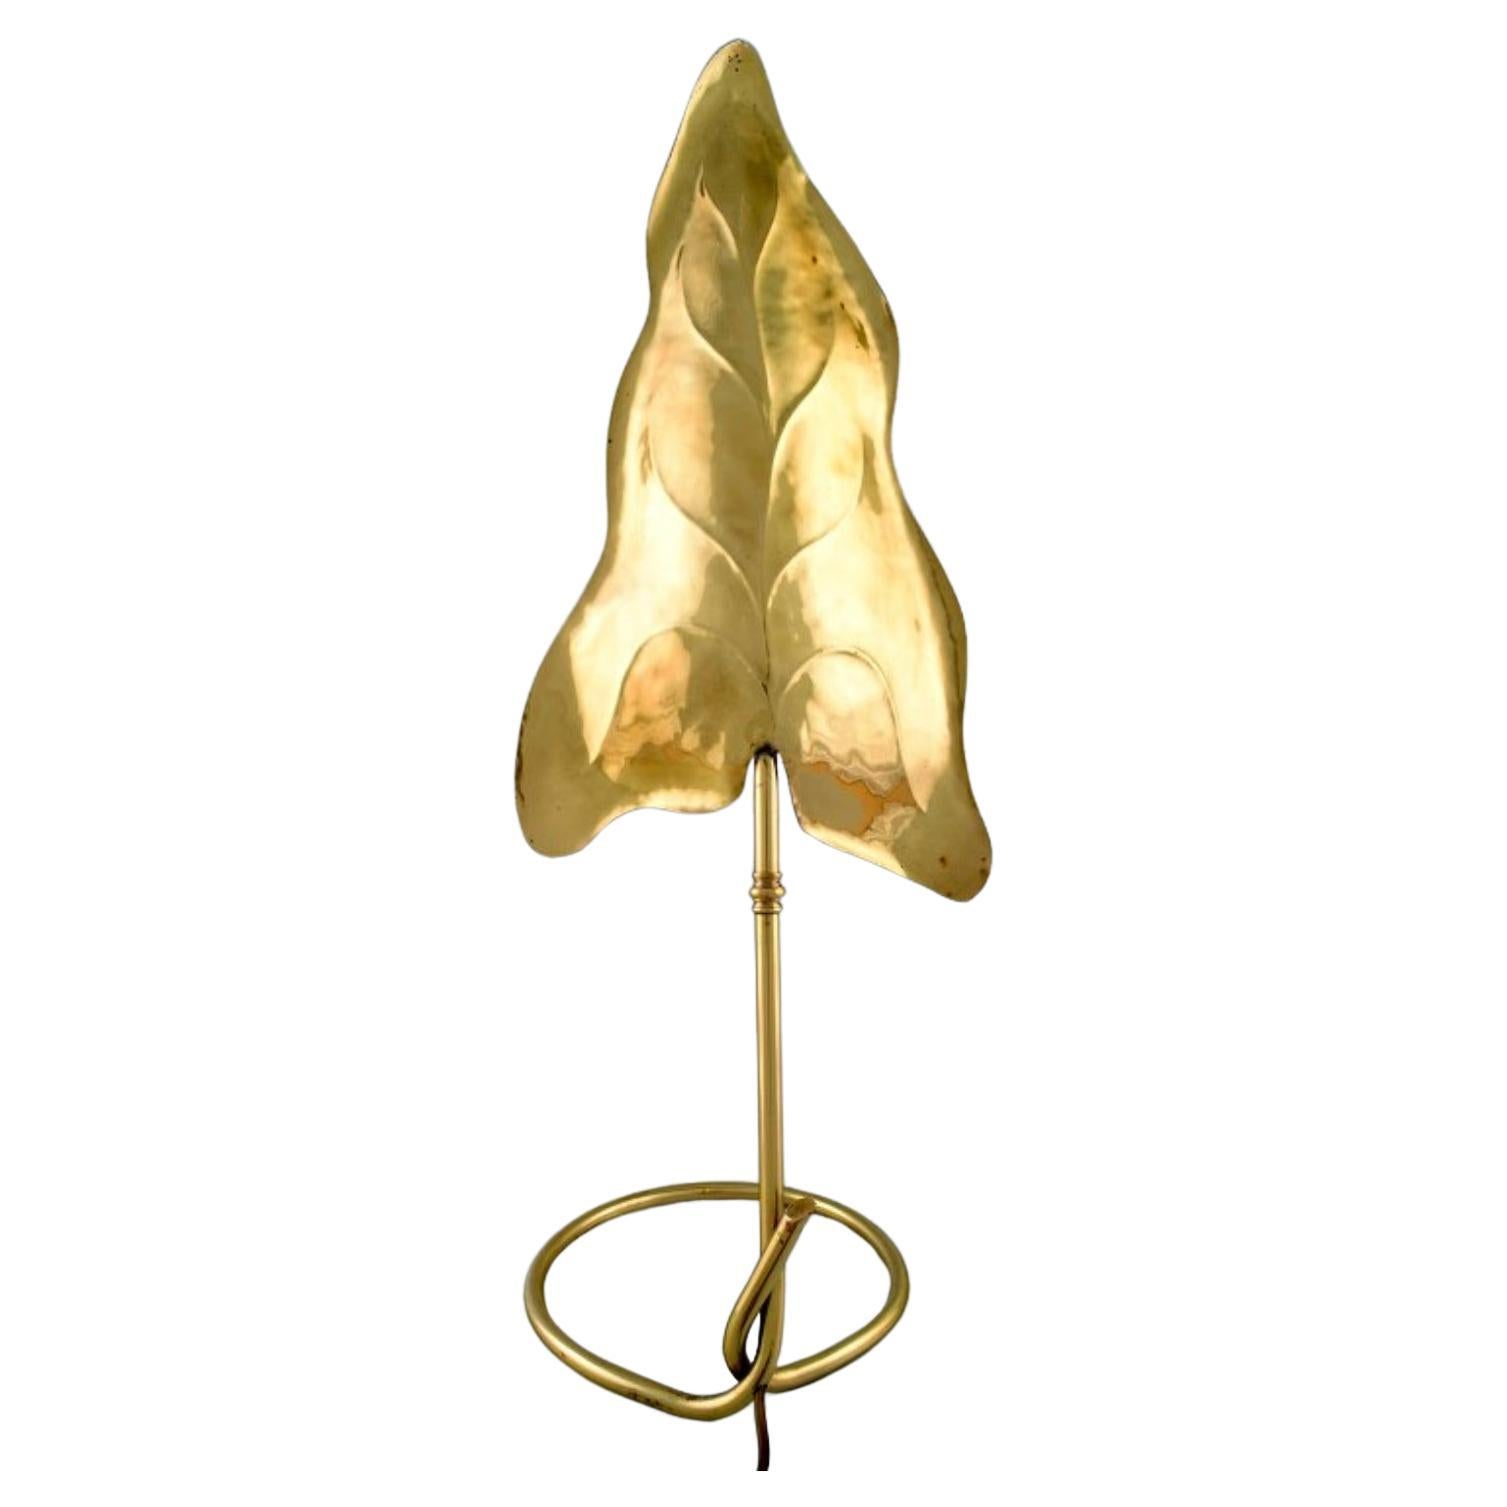 Tommaso Barbi, Leaf-Shaped Table Lamp in Brass, Mid-20th Century